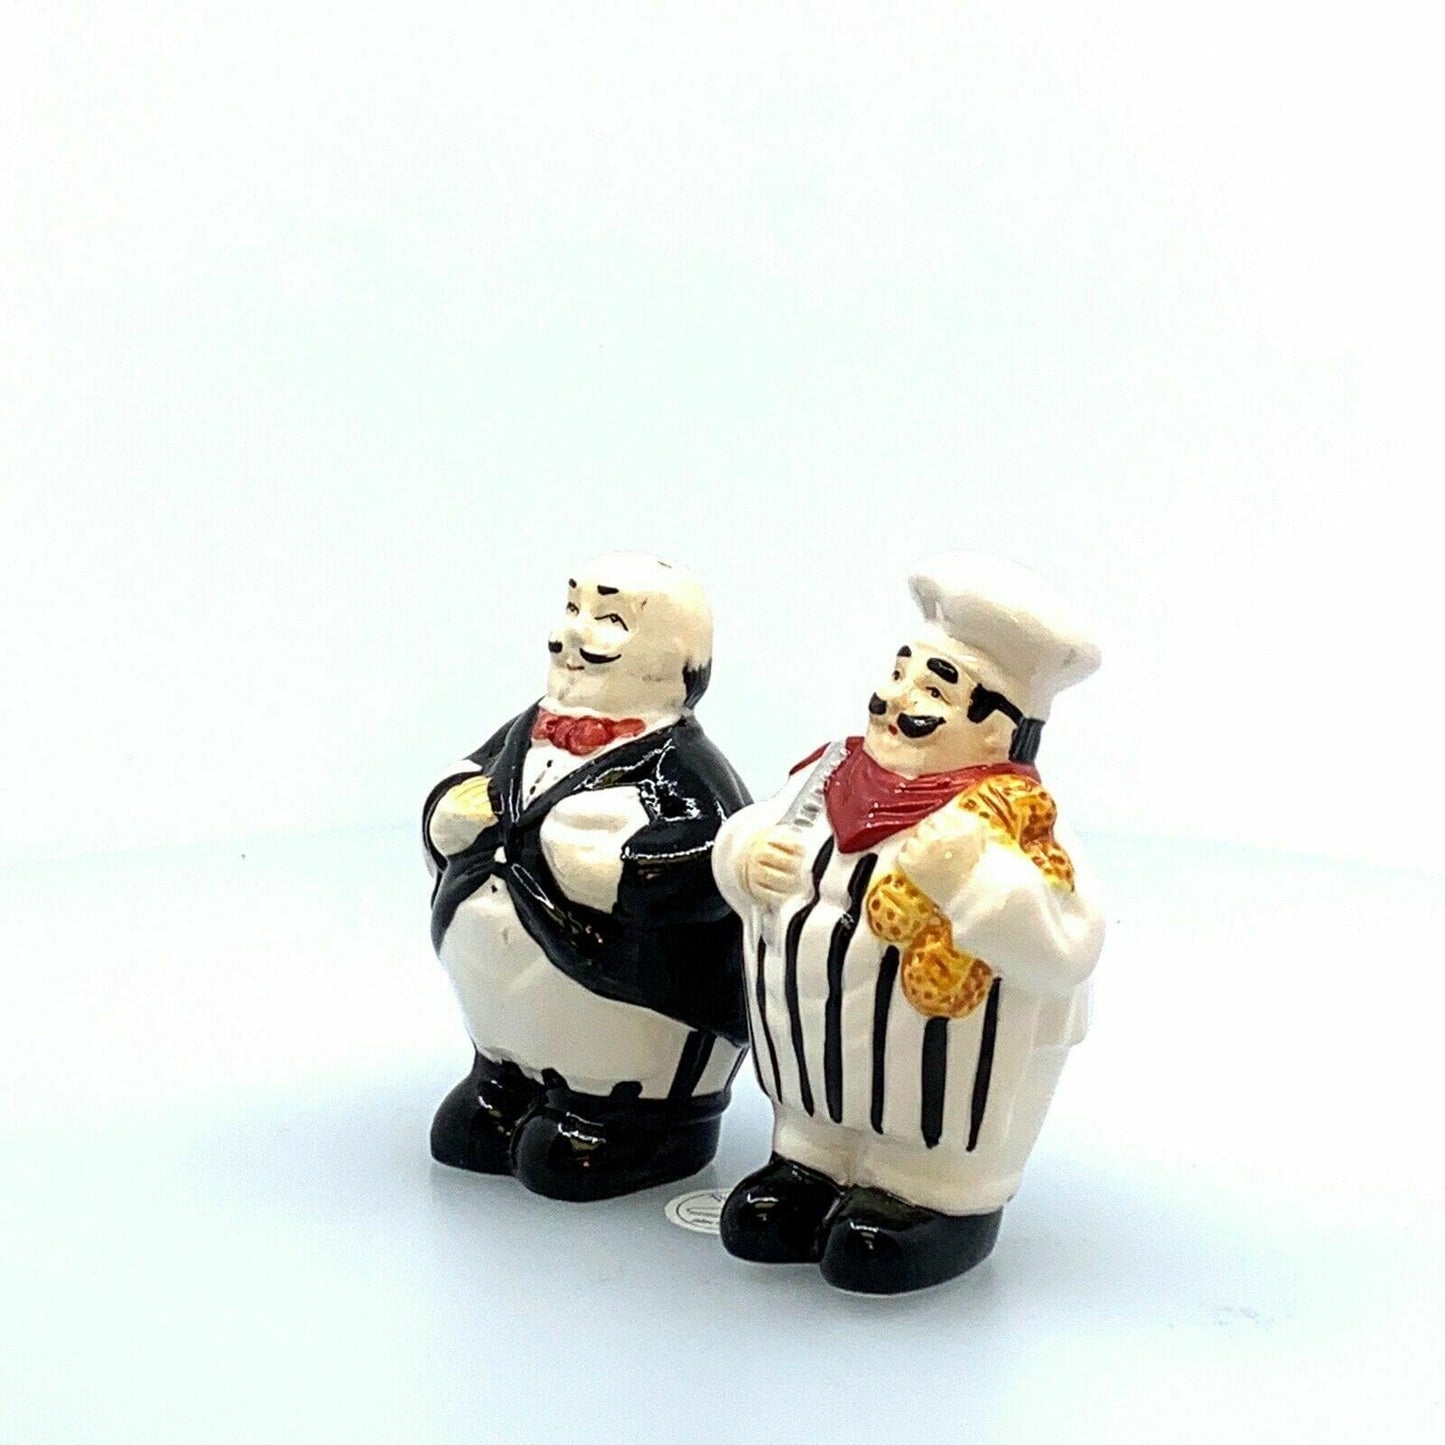 Vintage Giftco Italian Chef & Maitre D' Salt And Pepper Shakers Set Ceramic